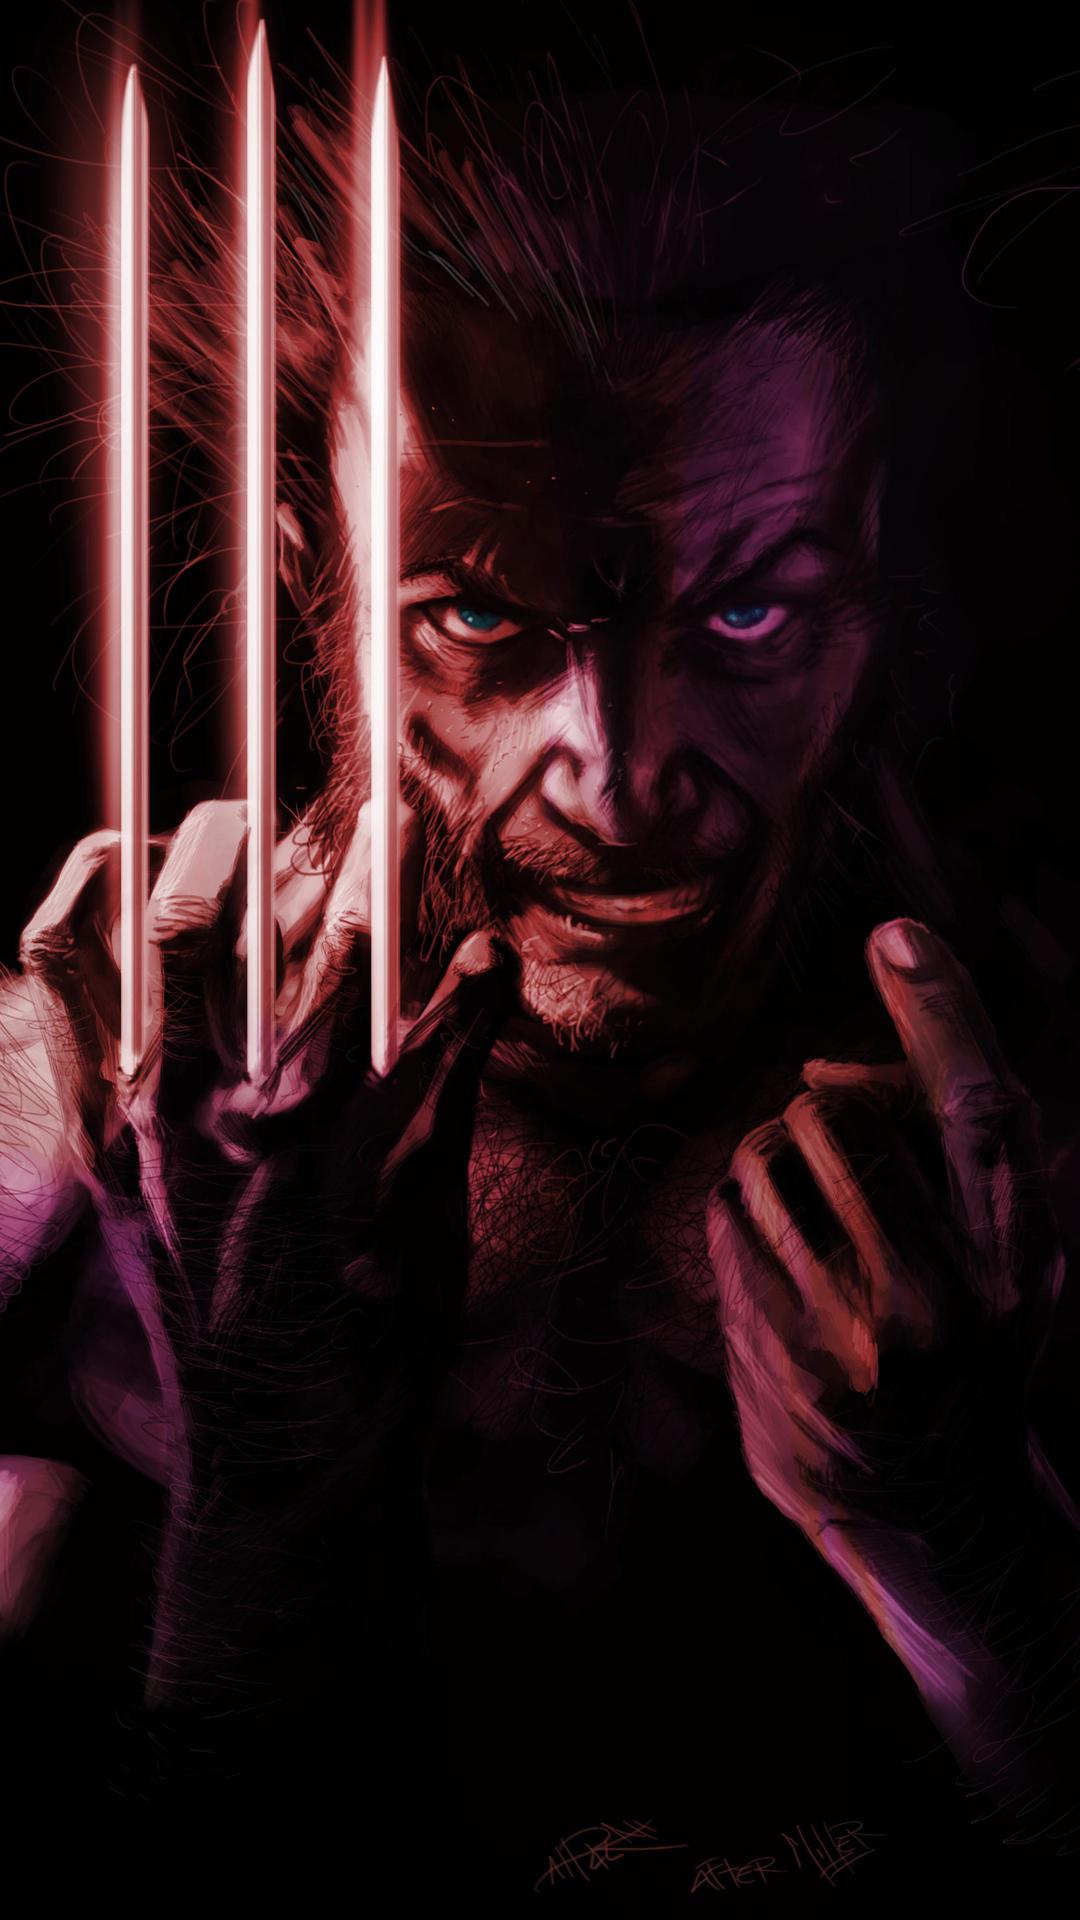 1080x1920 Wolverine Angry Art Mobile Wallpaper (iPhone, Android, Samsung, Pixel, Xiaomi)